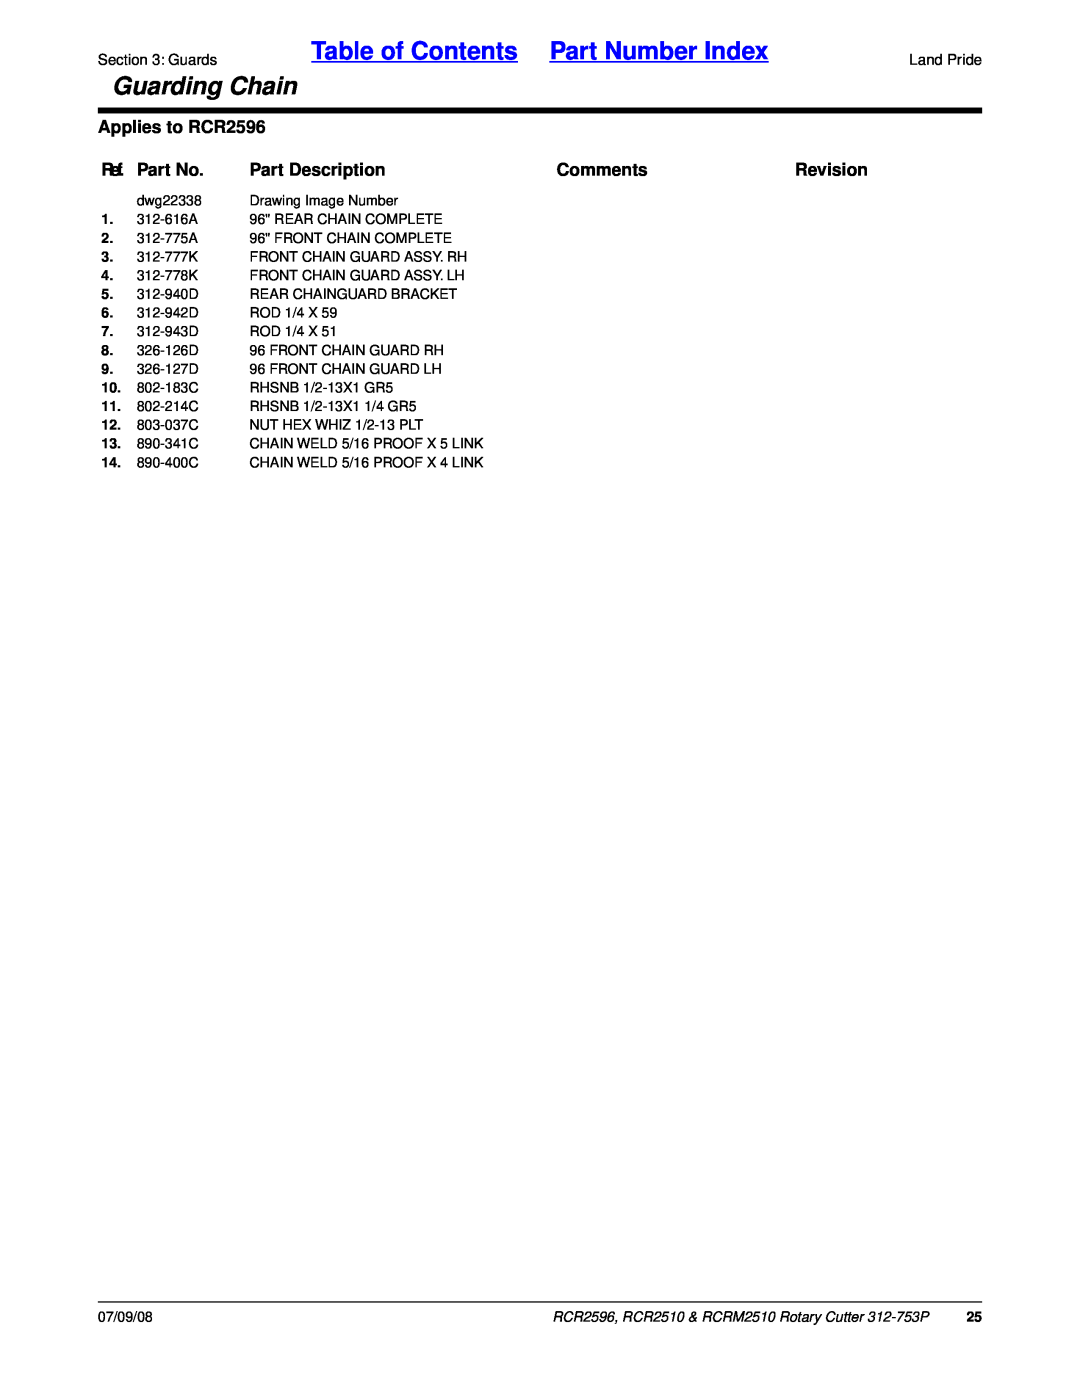 Land Pride RCRM2510 manual Table of Contents Part Number Index, Guarding Chain, Applies to RCR2596, Ref. Part No, Comments 